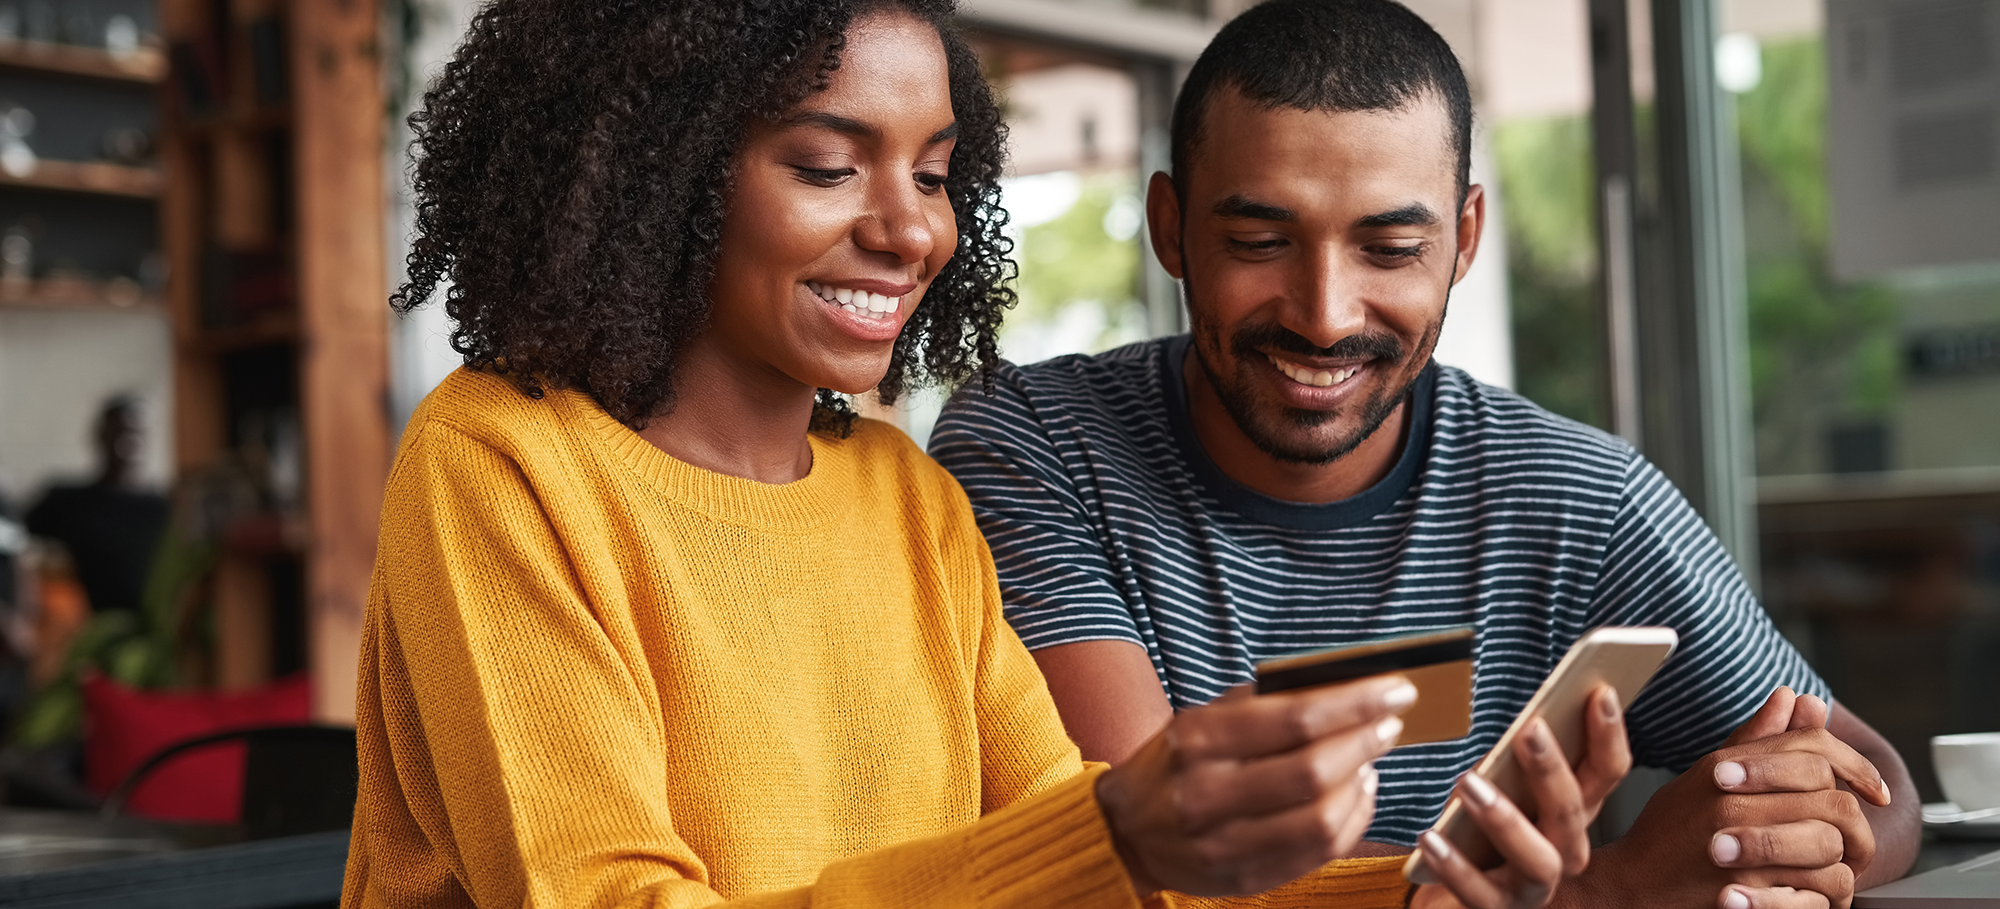 man and woman smiling sitting next to each other as she's holding a smart phone and a payment card | Digital Wings | Safe online shopping